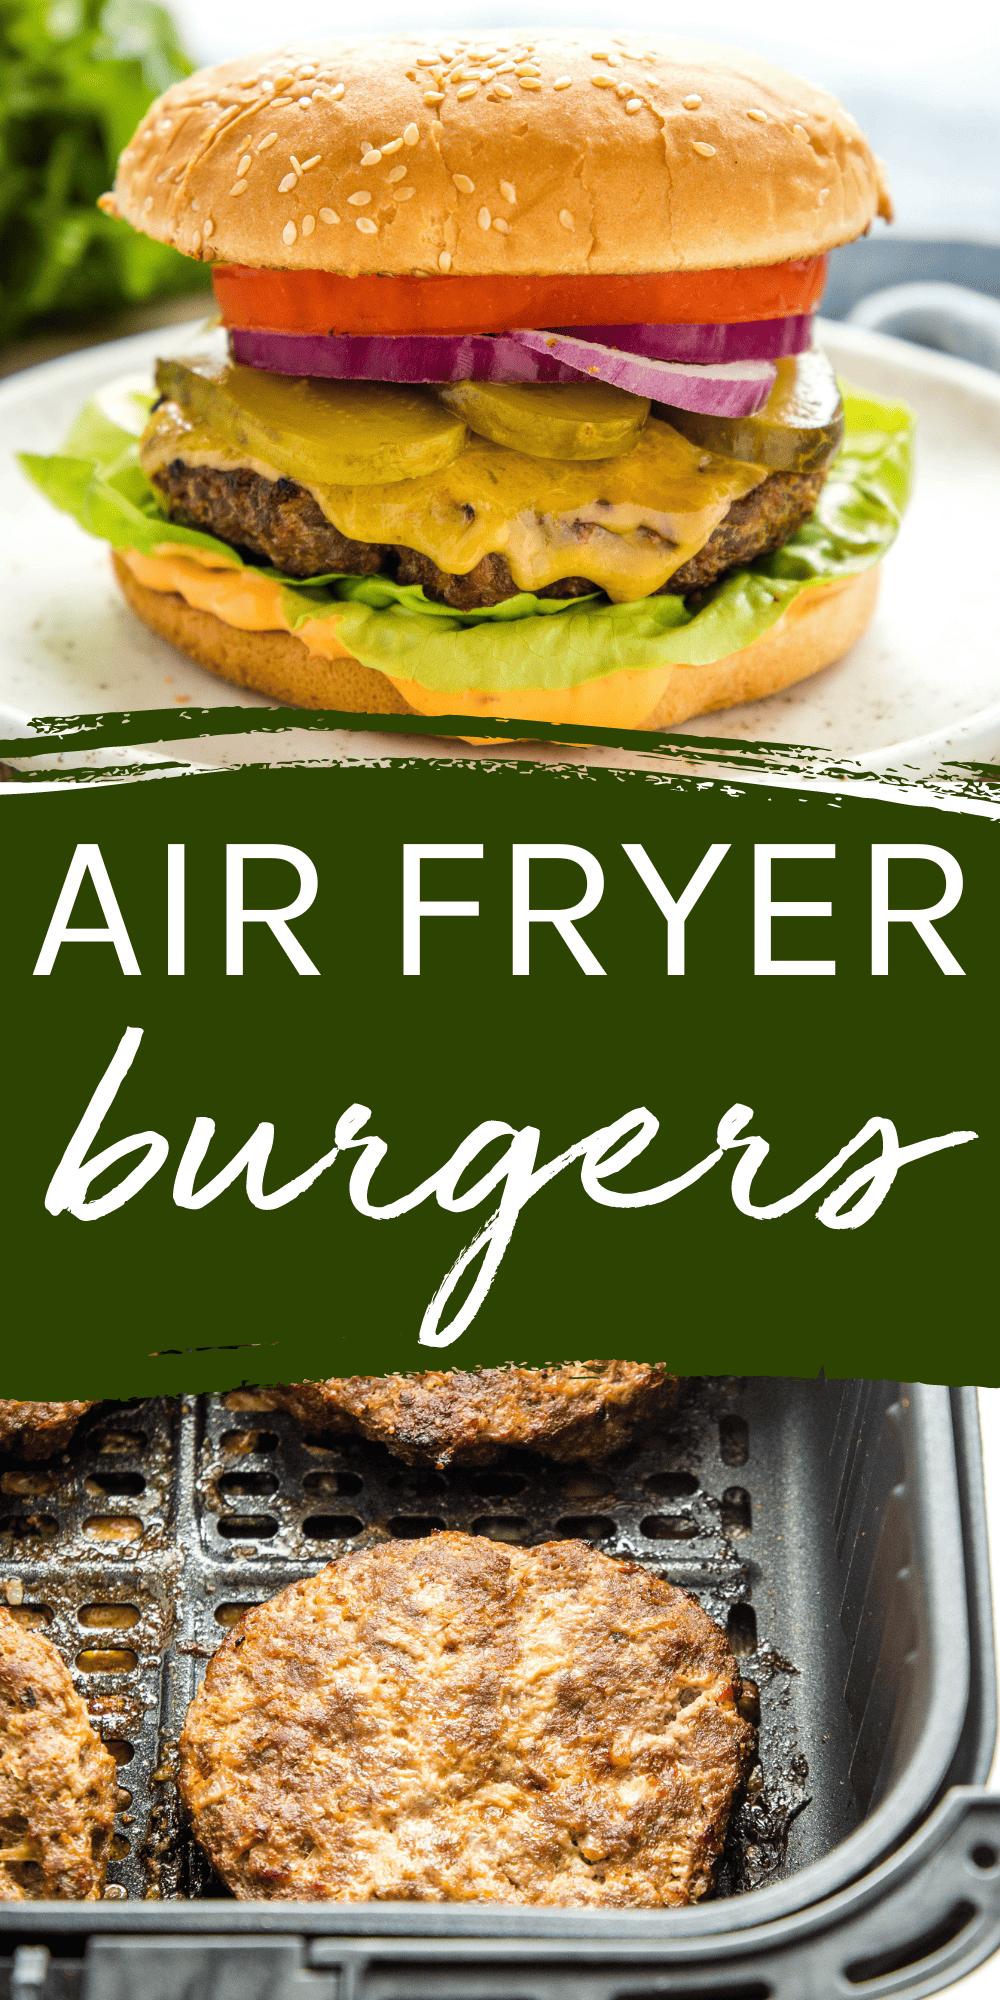 This Air Fryer Burgers recipe is the ultimate guide for making fresh or frozen homemade burgers in the air fryer. Expert tips for perfectly cooked, juicy burgers bursting with flavour. Elevate your burger game with our no fail air fryer burger recipe! Recipe from thebusybaker.ca! #homemadeburgers #airfryerburgers #airfryerburger #burgersrecipe #burgerrecipe #homemade #airfryerrecipe #dinner #easyburgers #perfectburgers via @busybakerblog